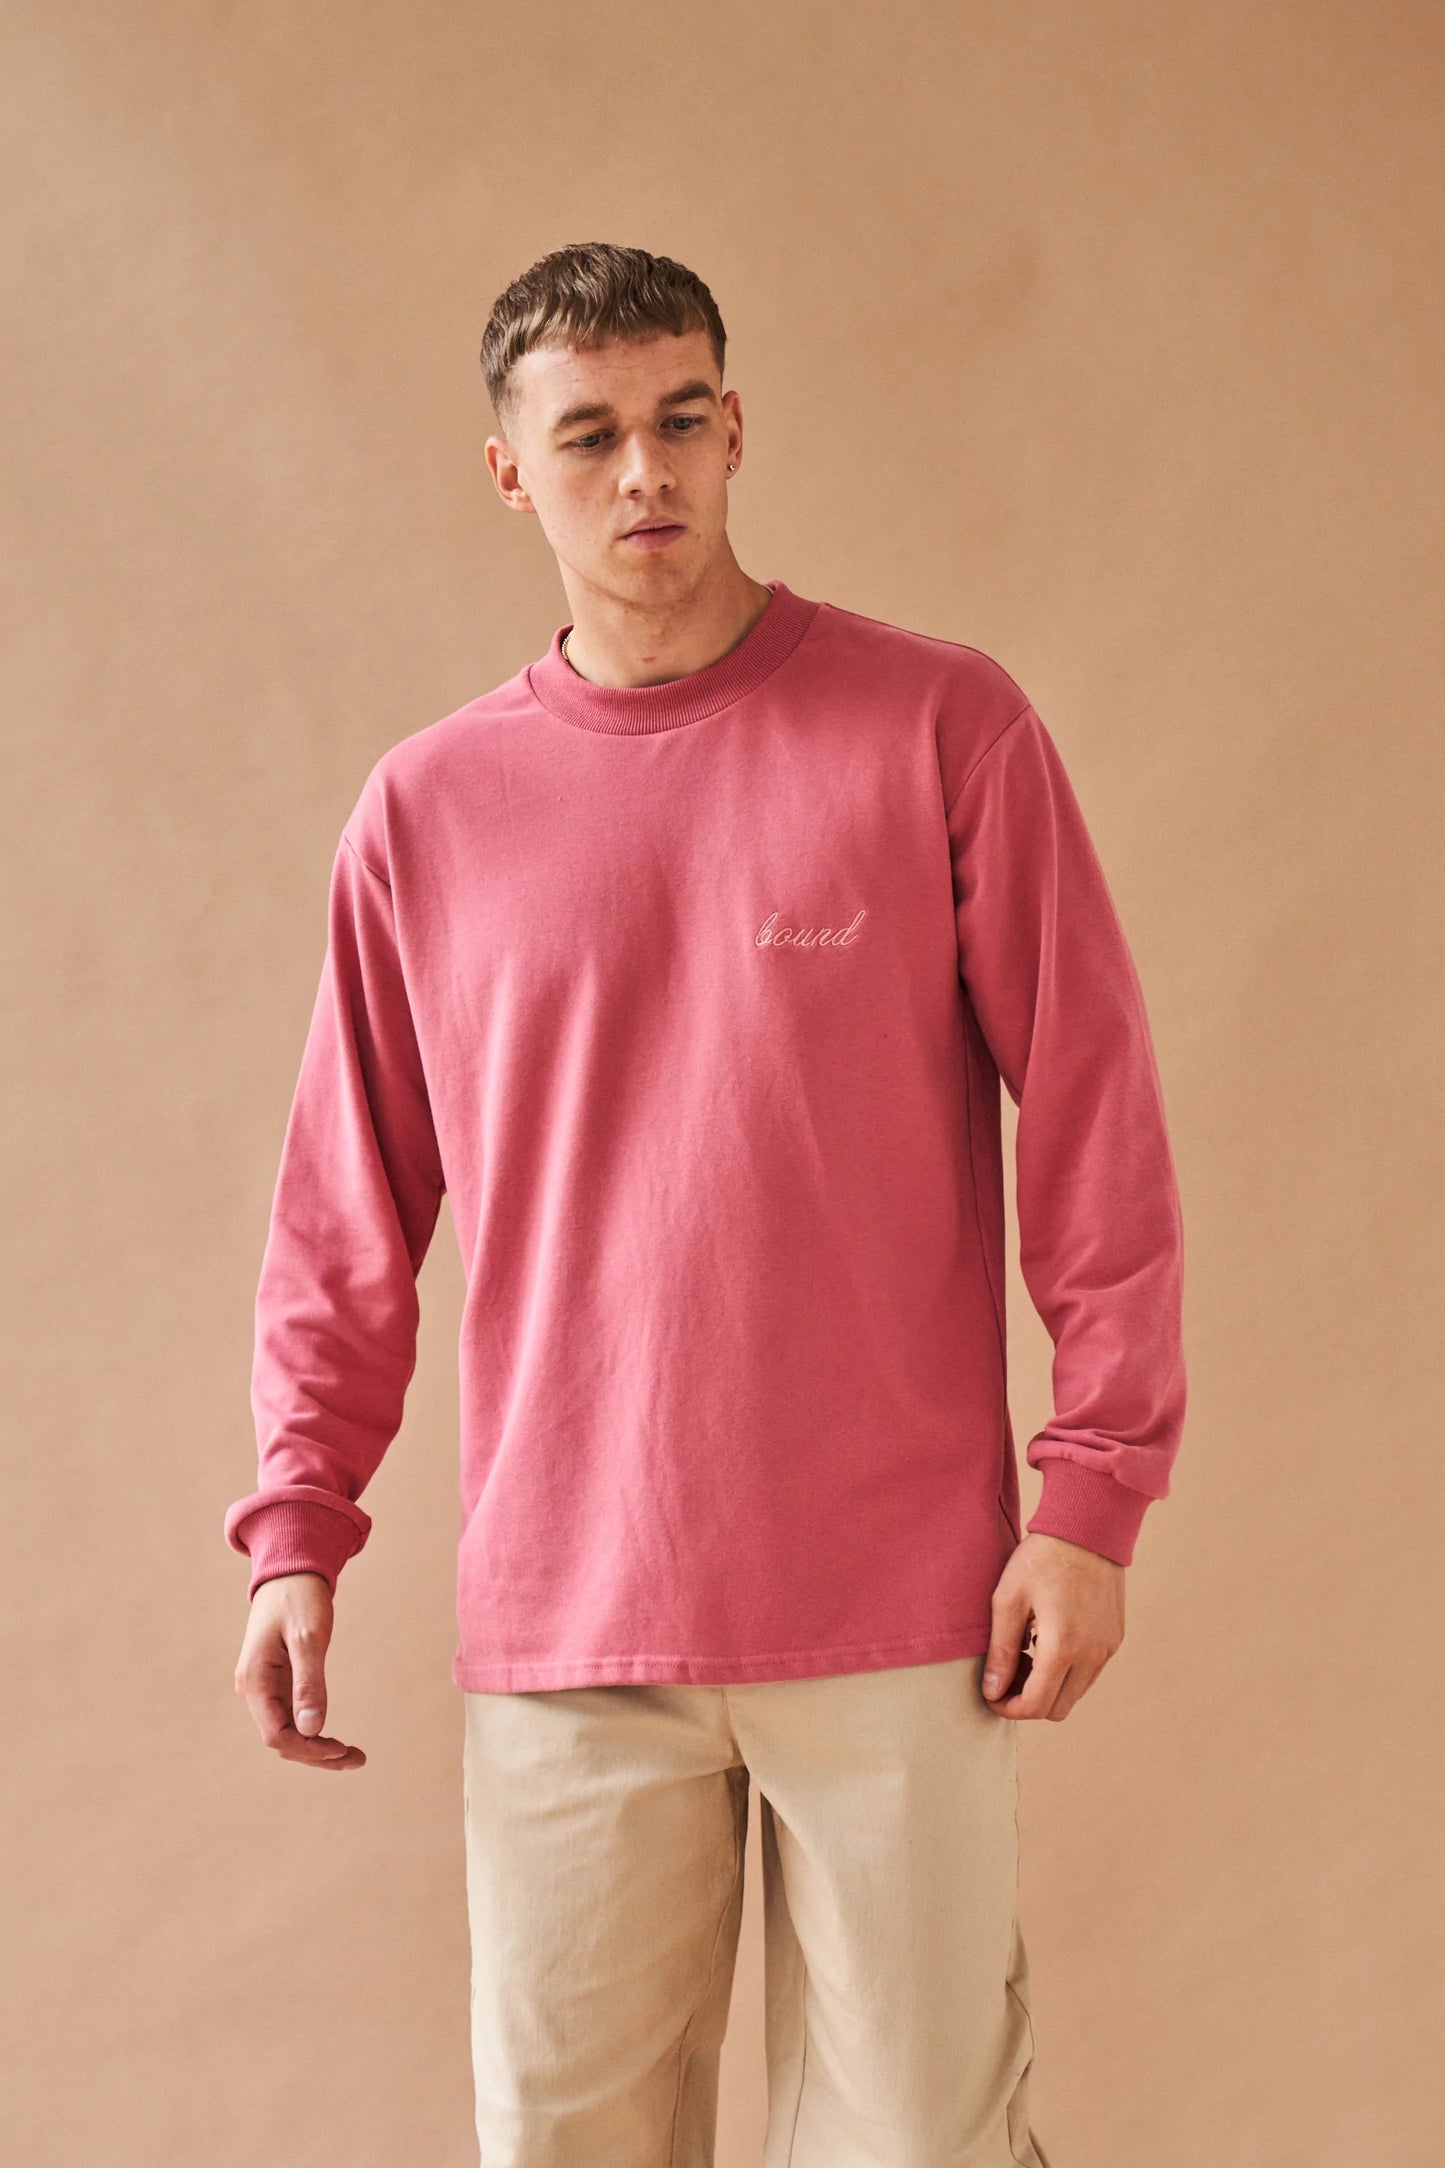 bound 'Berry Script' Embroidered Longsleeve Tee